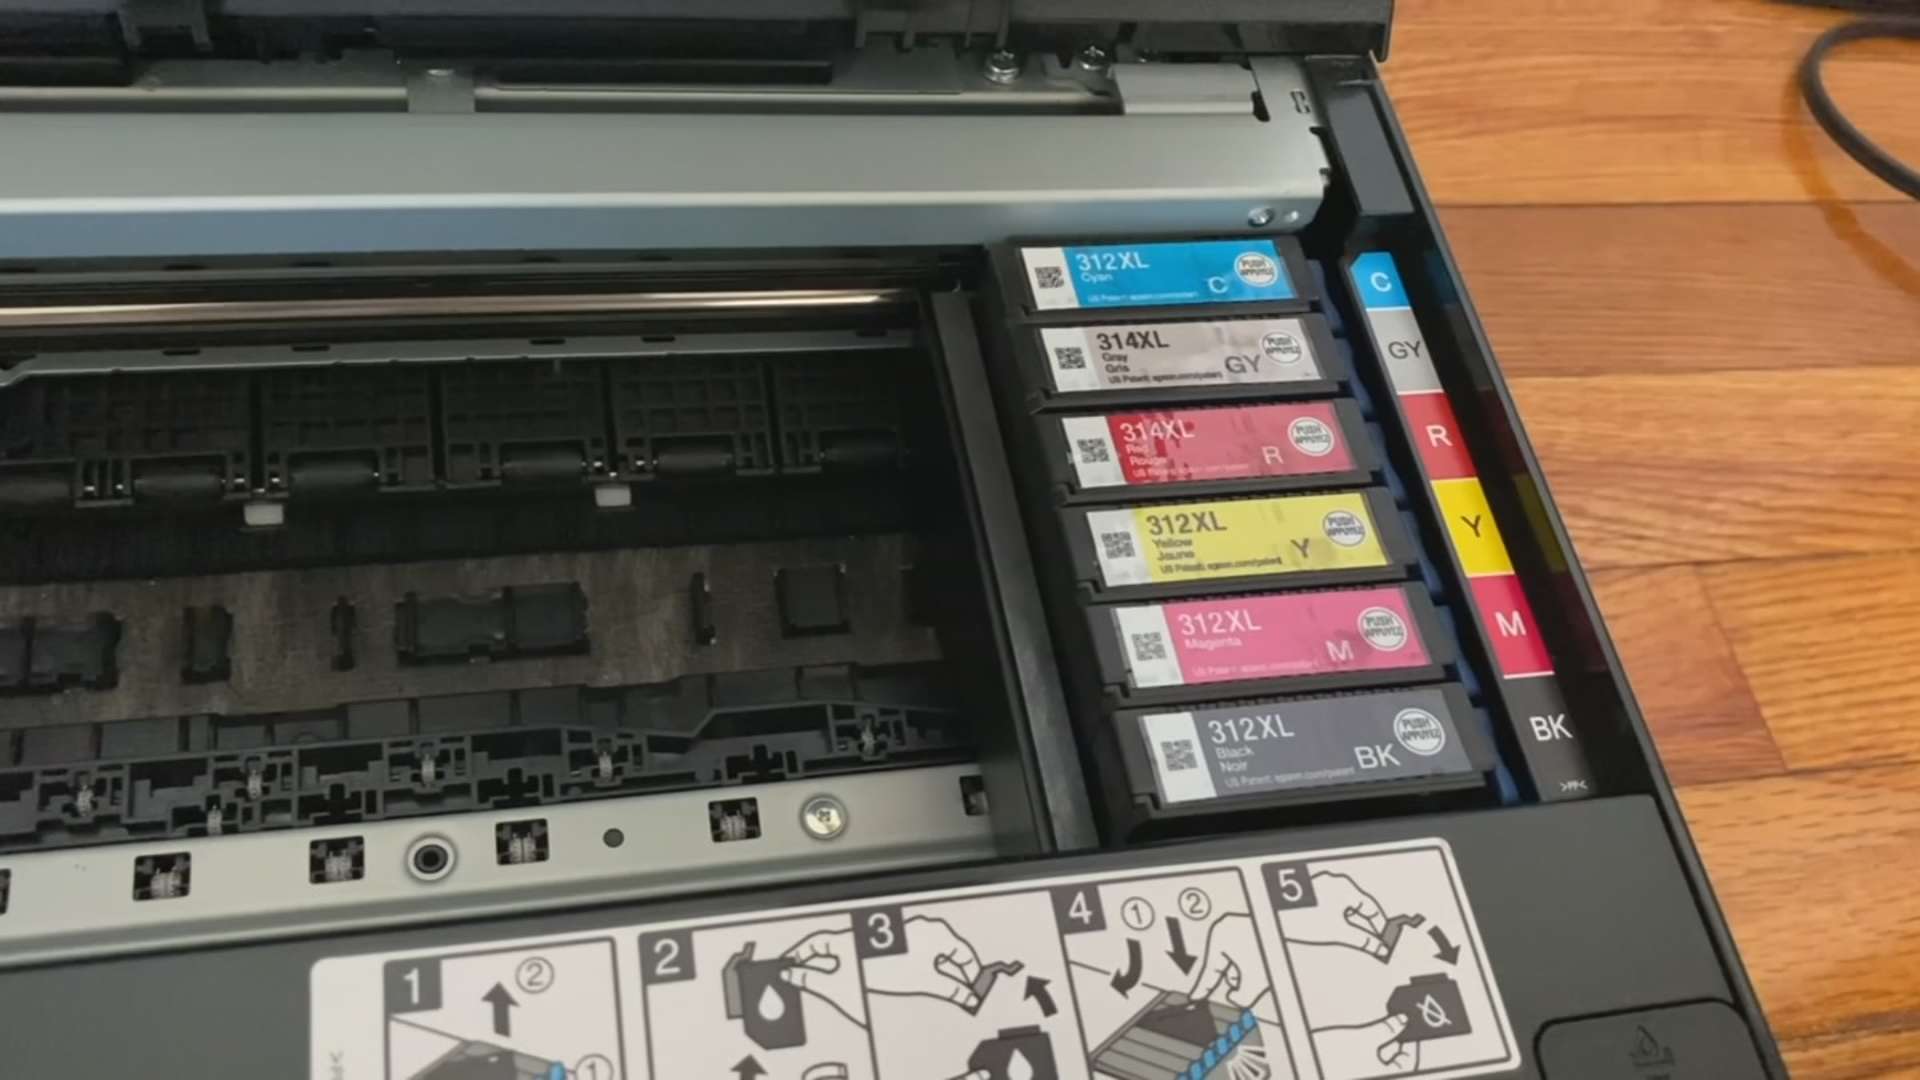 Consumer Reports: Choosing the best ink printer